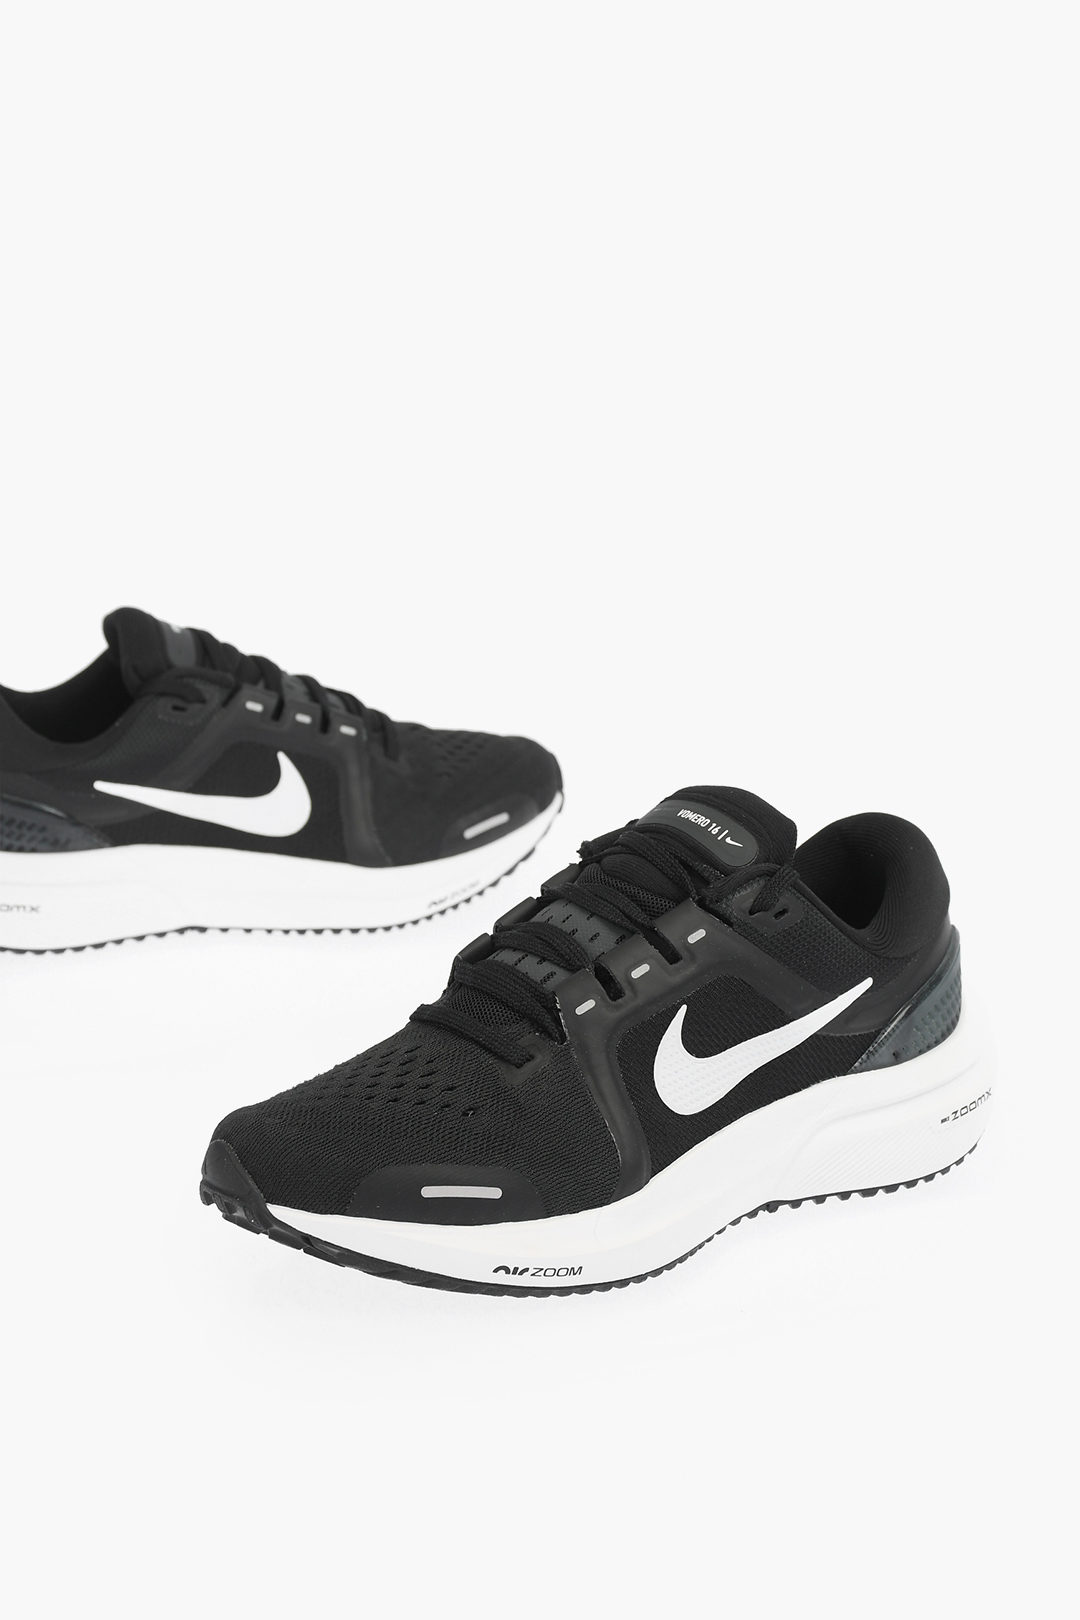 agricultores Registrarse segundo Nike Fabric AIR ZOOM VOMERO 16 Sneakers women - Glamood Outlet